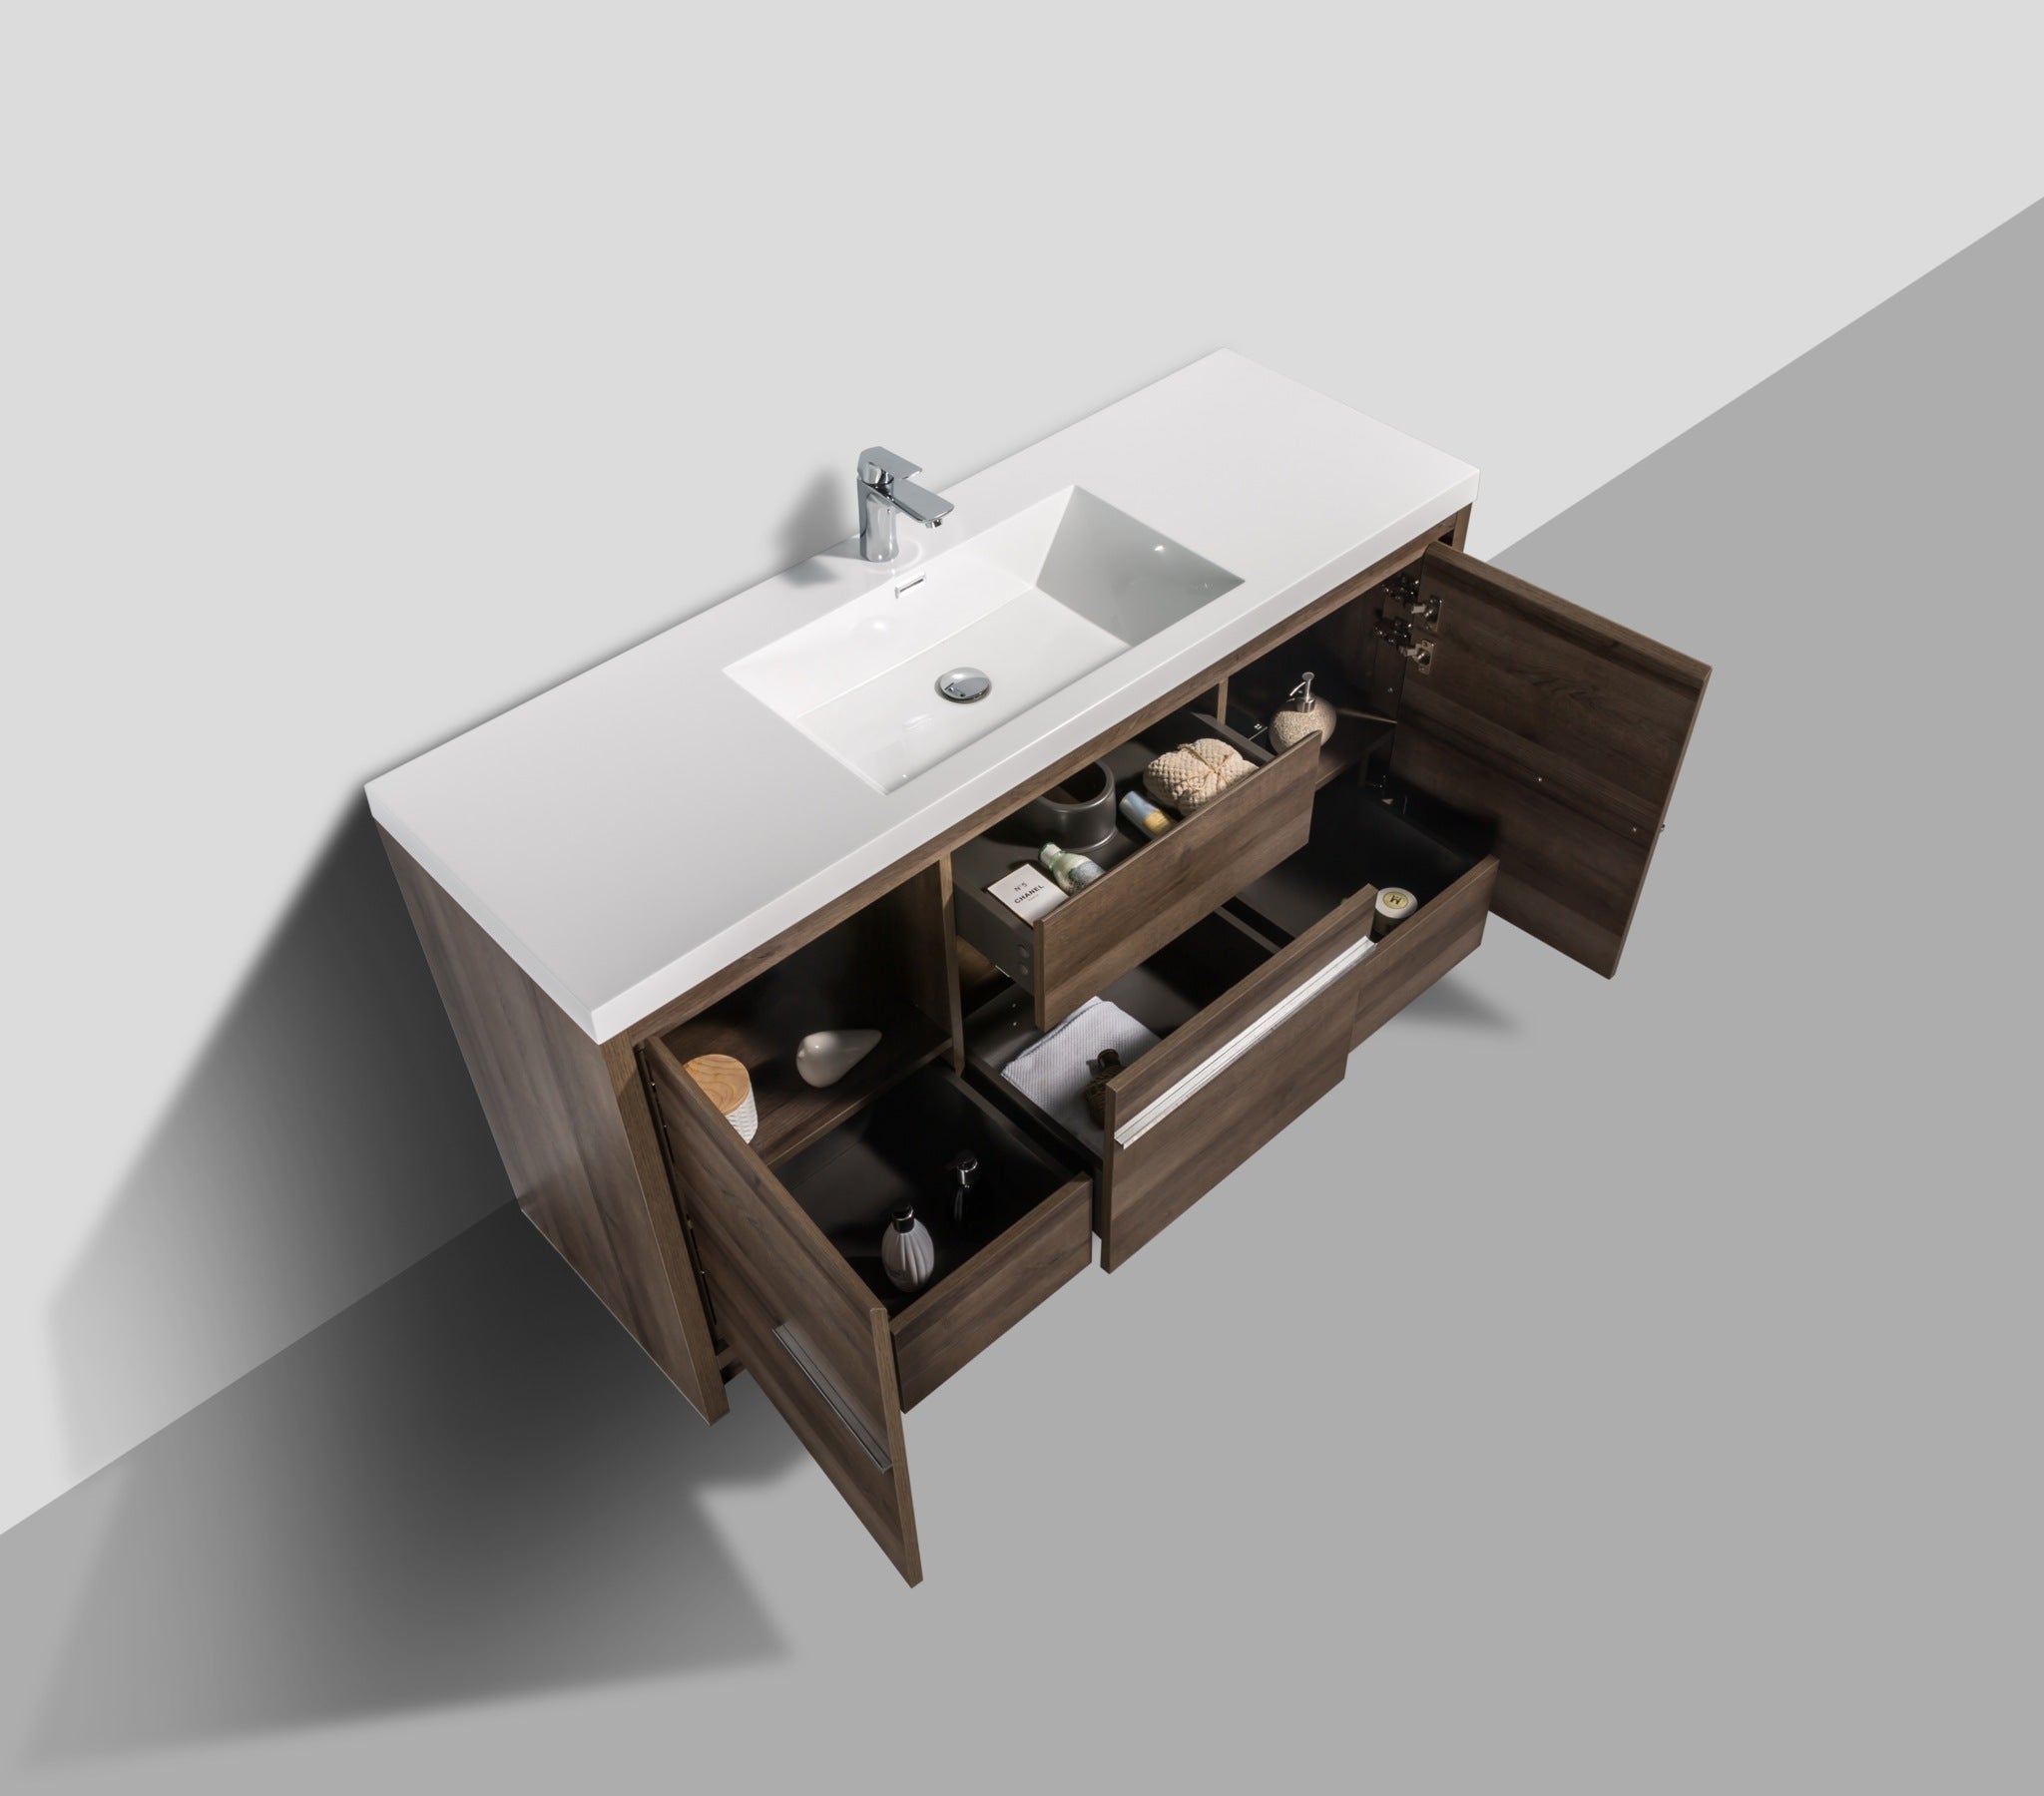 Granada 59 Brown Oak With Chrome Handle Cabinet, Square Cultured Marble Single Sink, Free Standing Modern Vanity Set